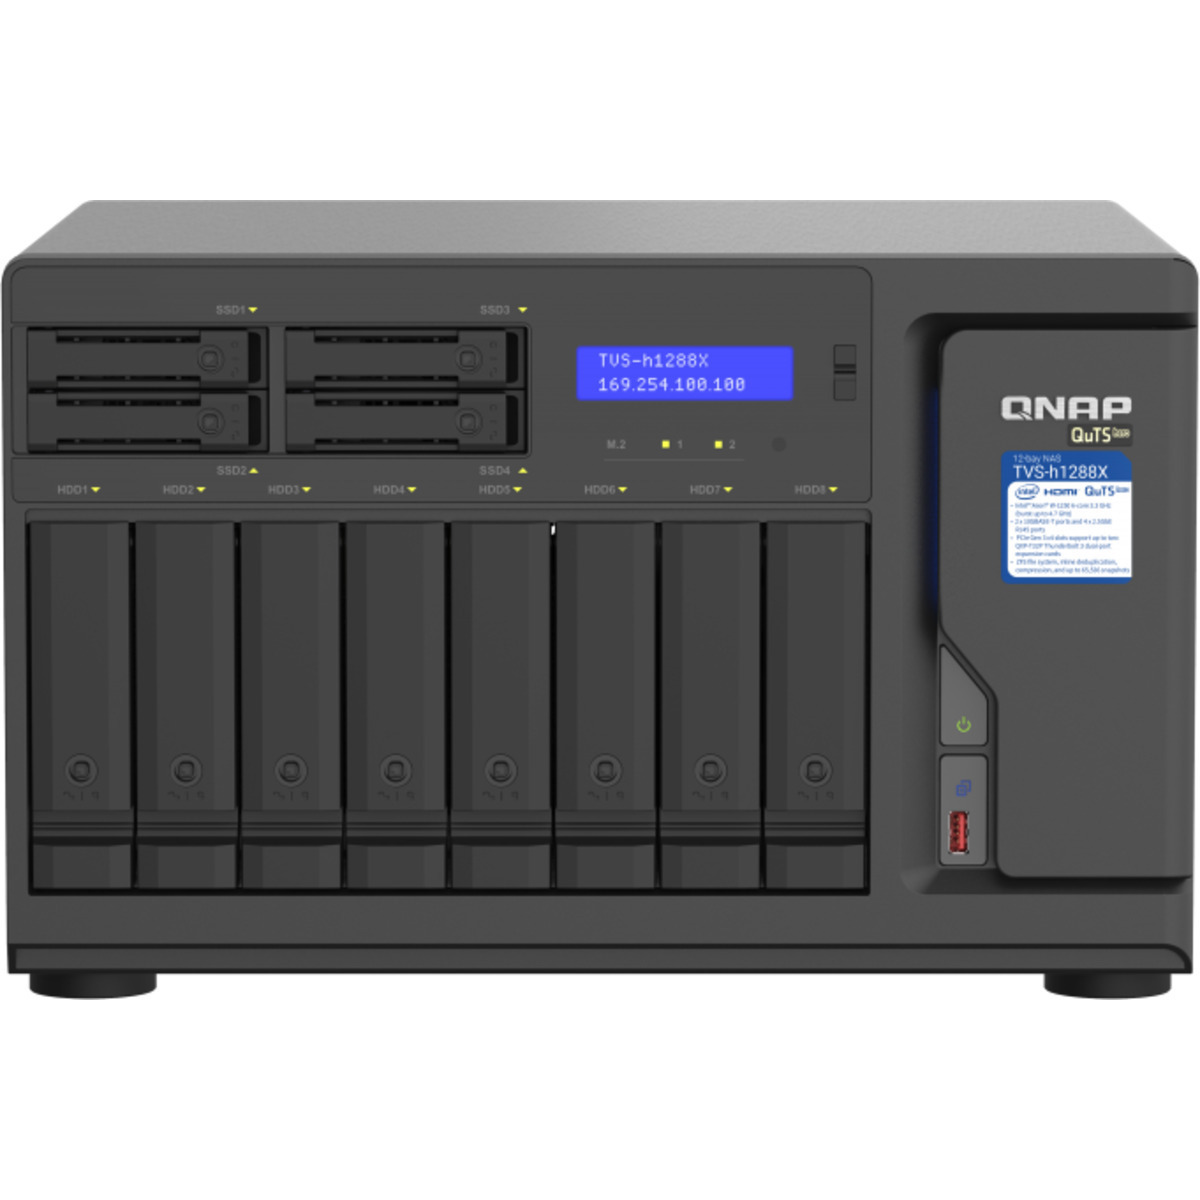 QNAP TVS-h1288X QuTS hero NAS Desktop 8+4-Bay Multimedia / Power User / Business NAS - Network Attached Storage Device Burn-In Tested Configurations TVS-h1288X QuTS hero NAS